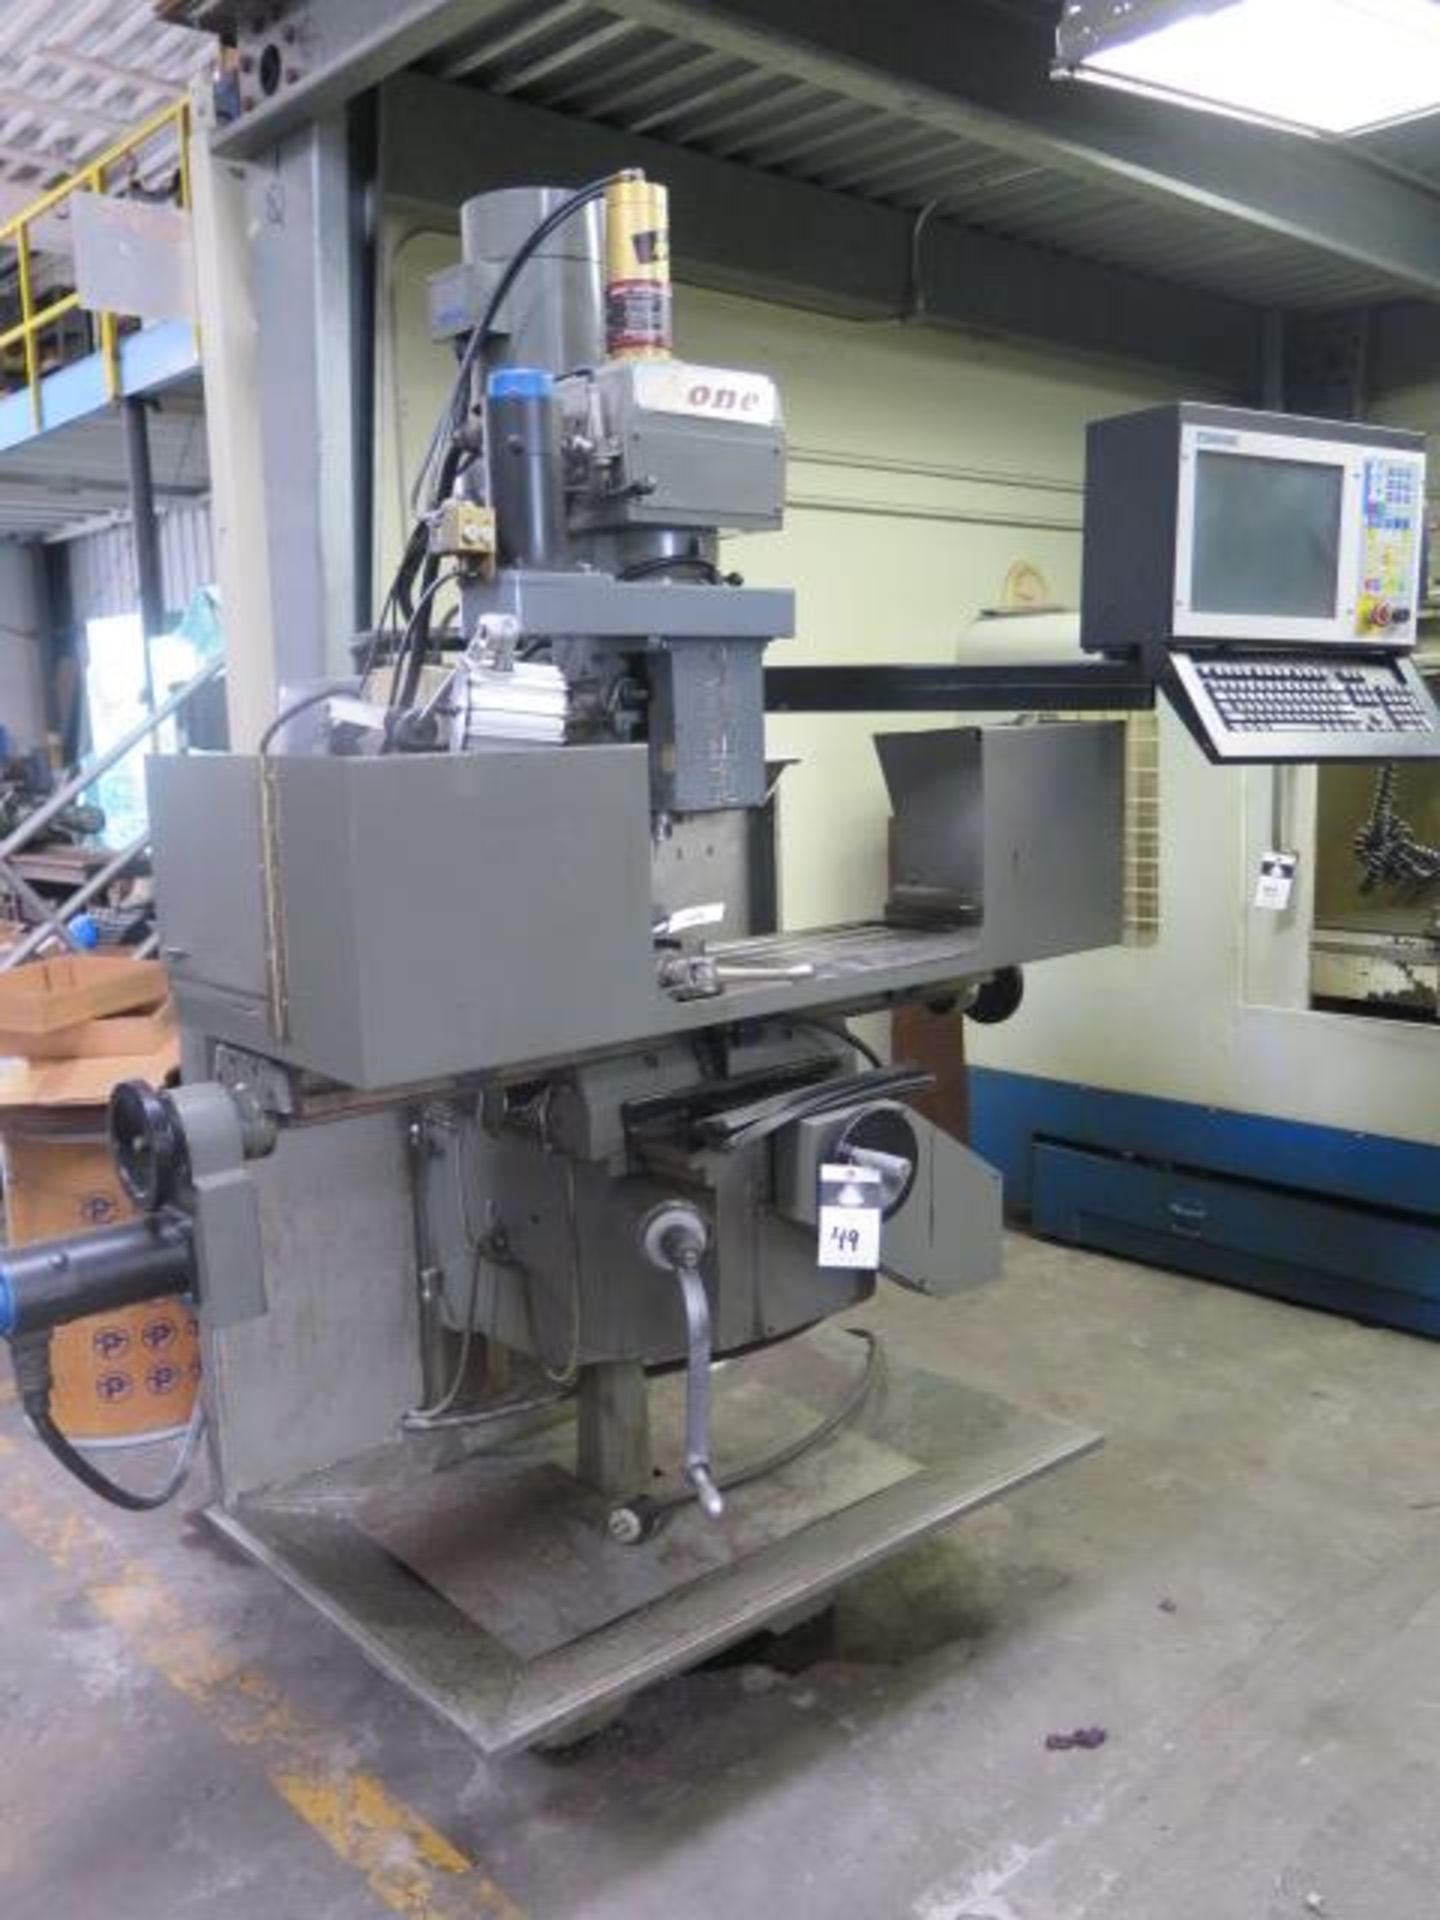 2006 Atrump “A One” 3VK WVERTER 3-Axis CNC Vertical Mill s/n 95041 w/ Centroid Controls, Hand Wheel, - Image 2 of 12